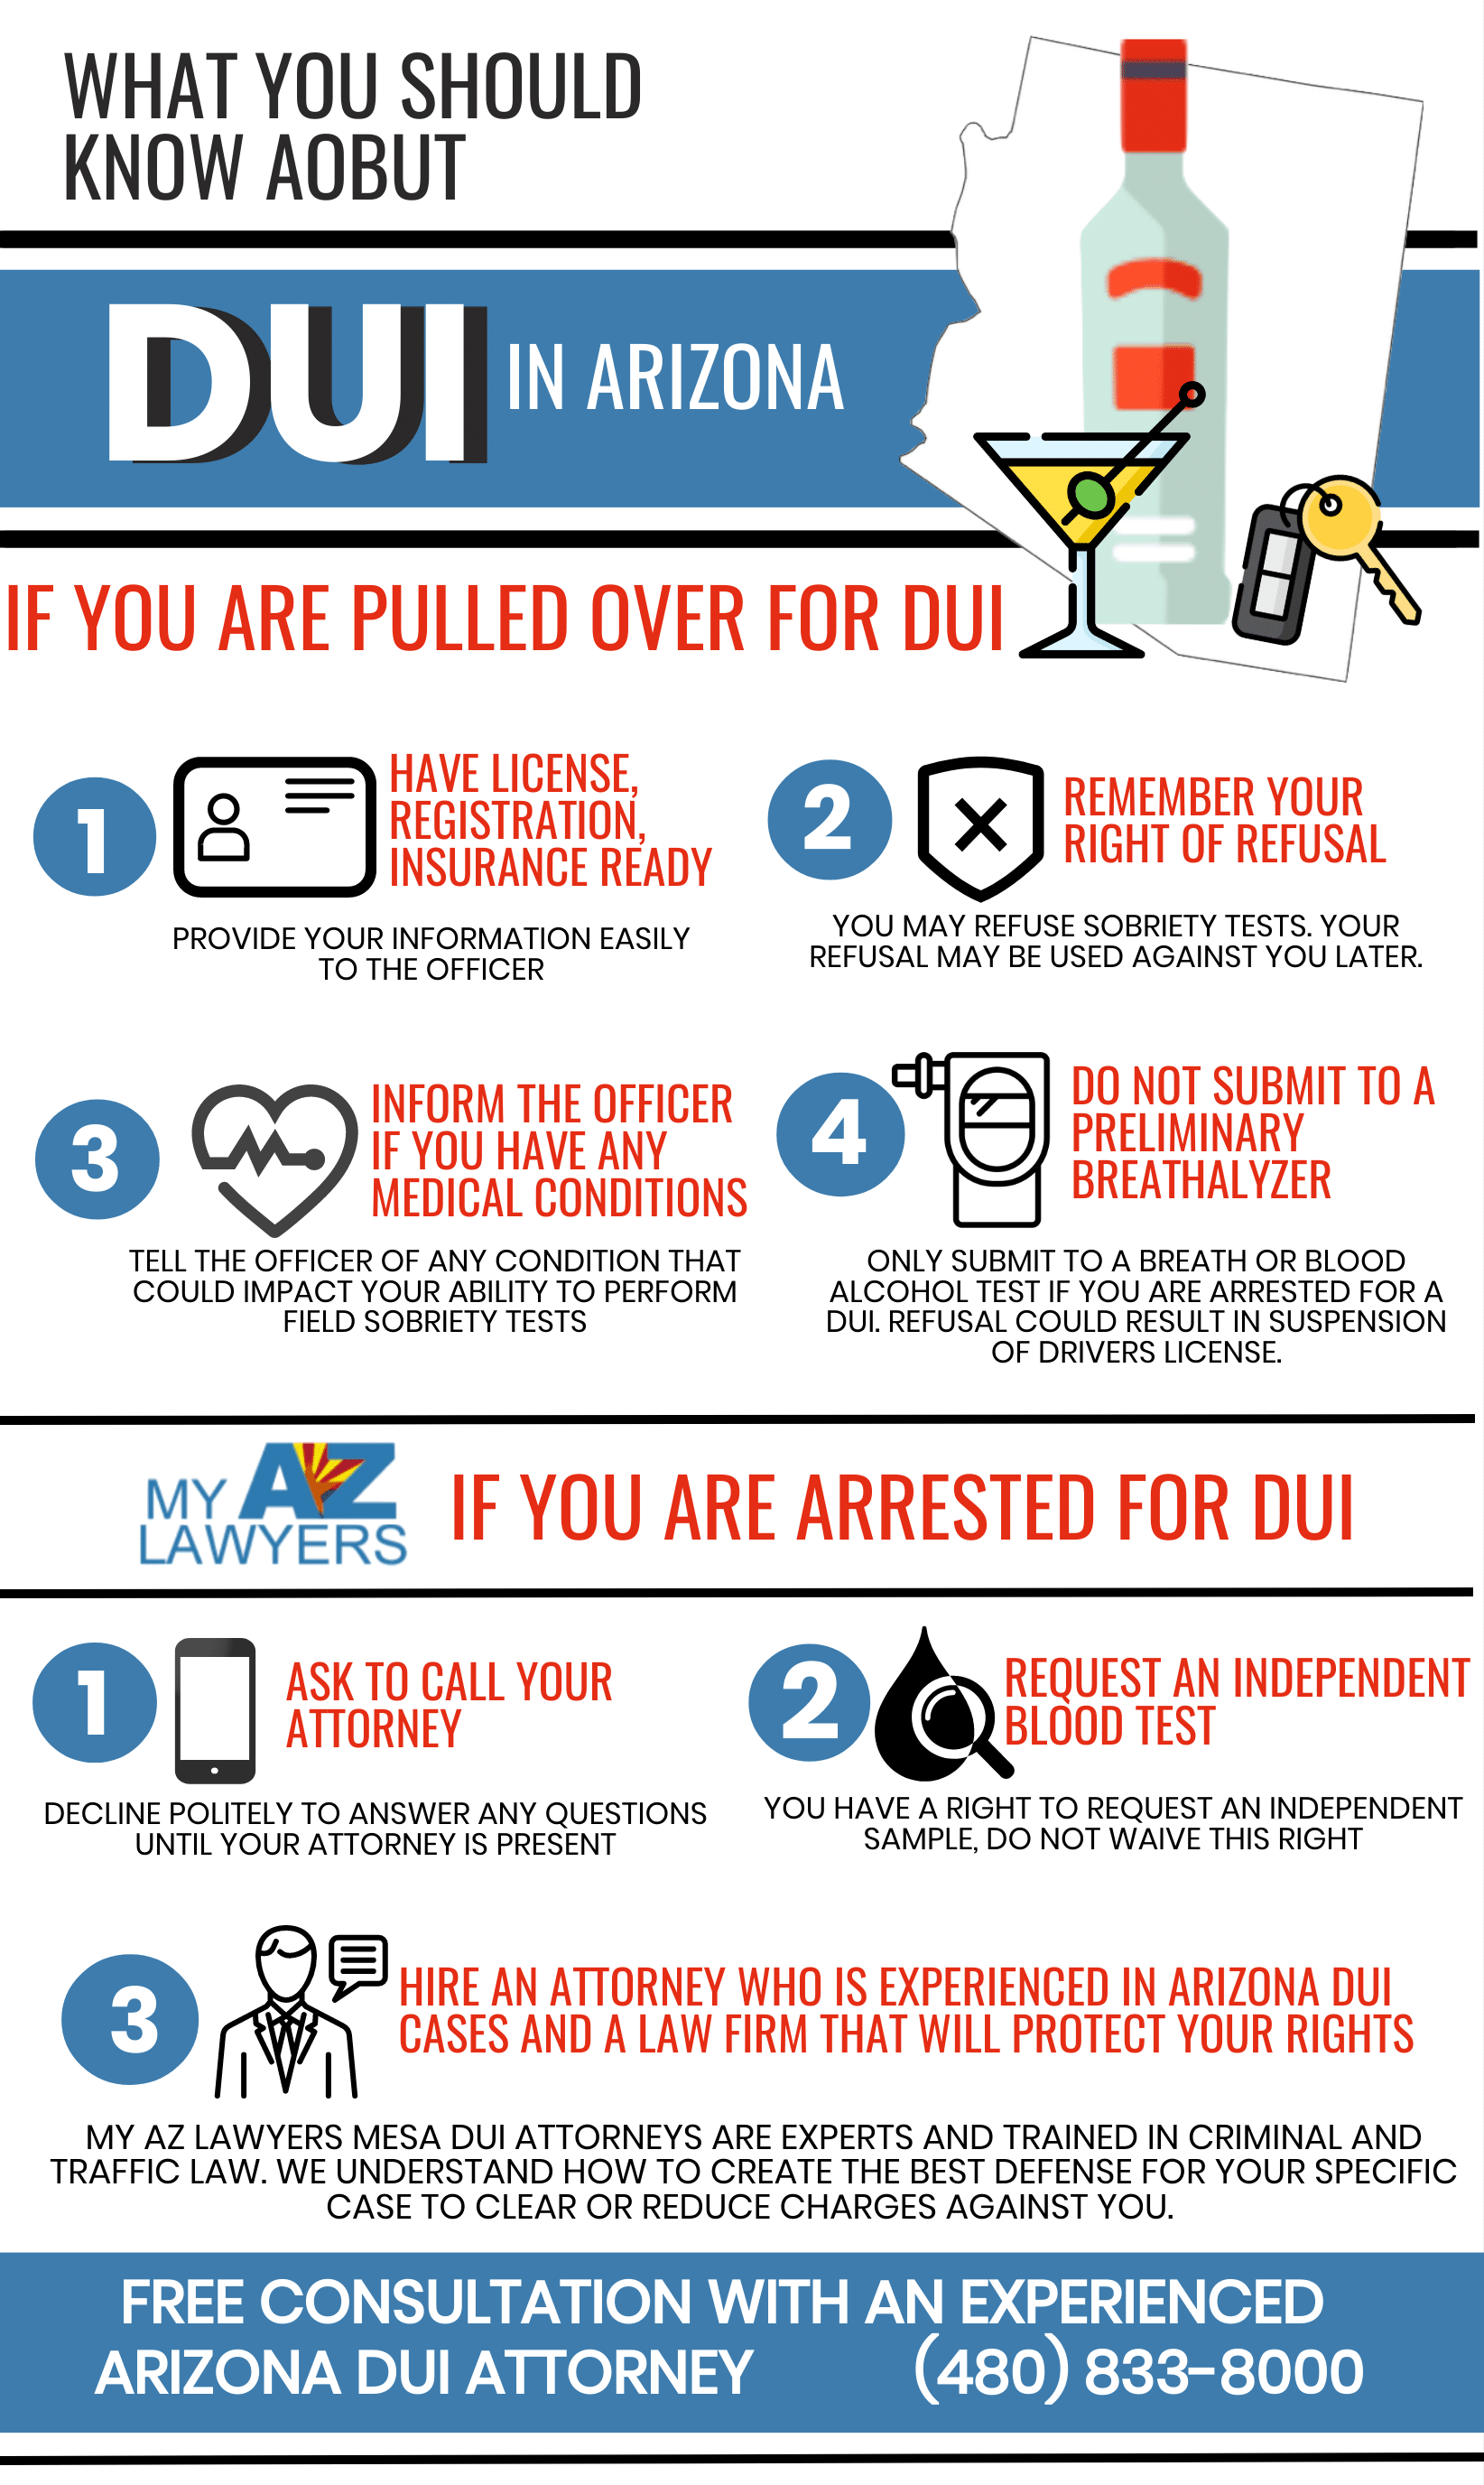 What to do if you are arrested for DUI in Arizona infographic